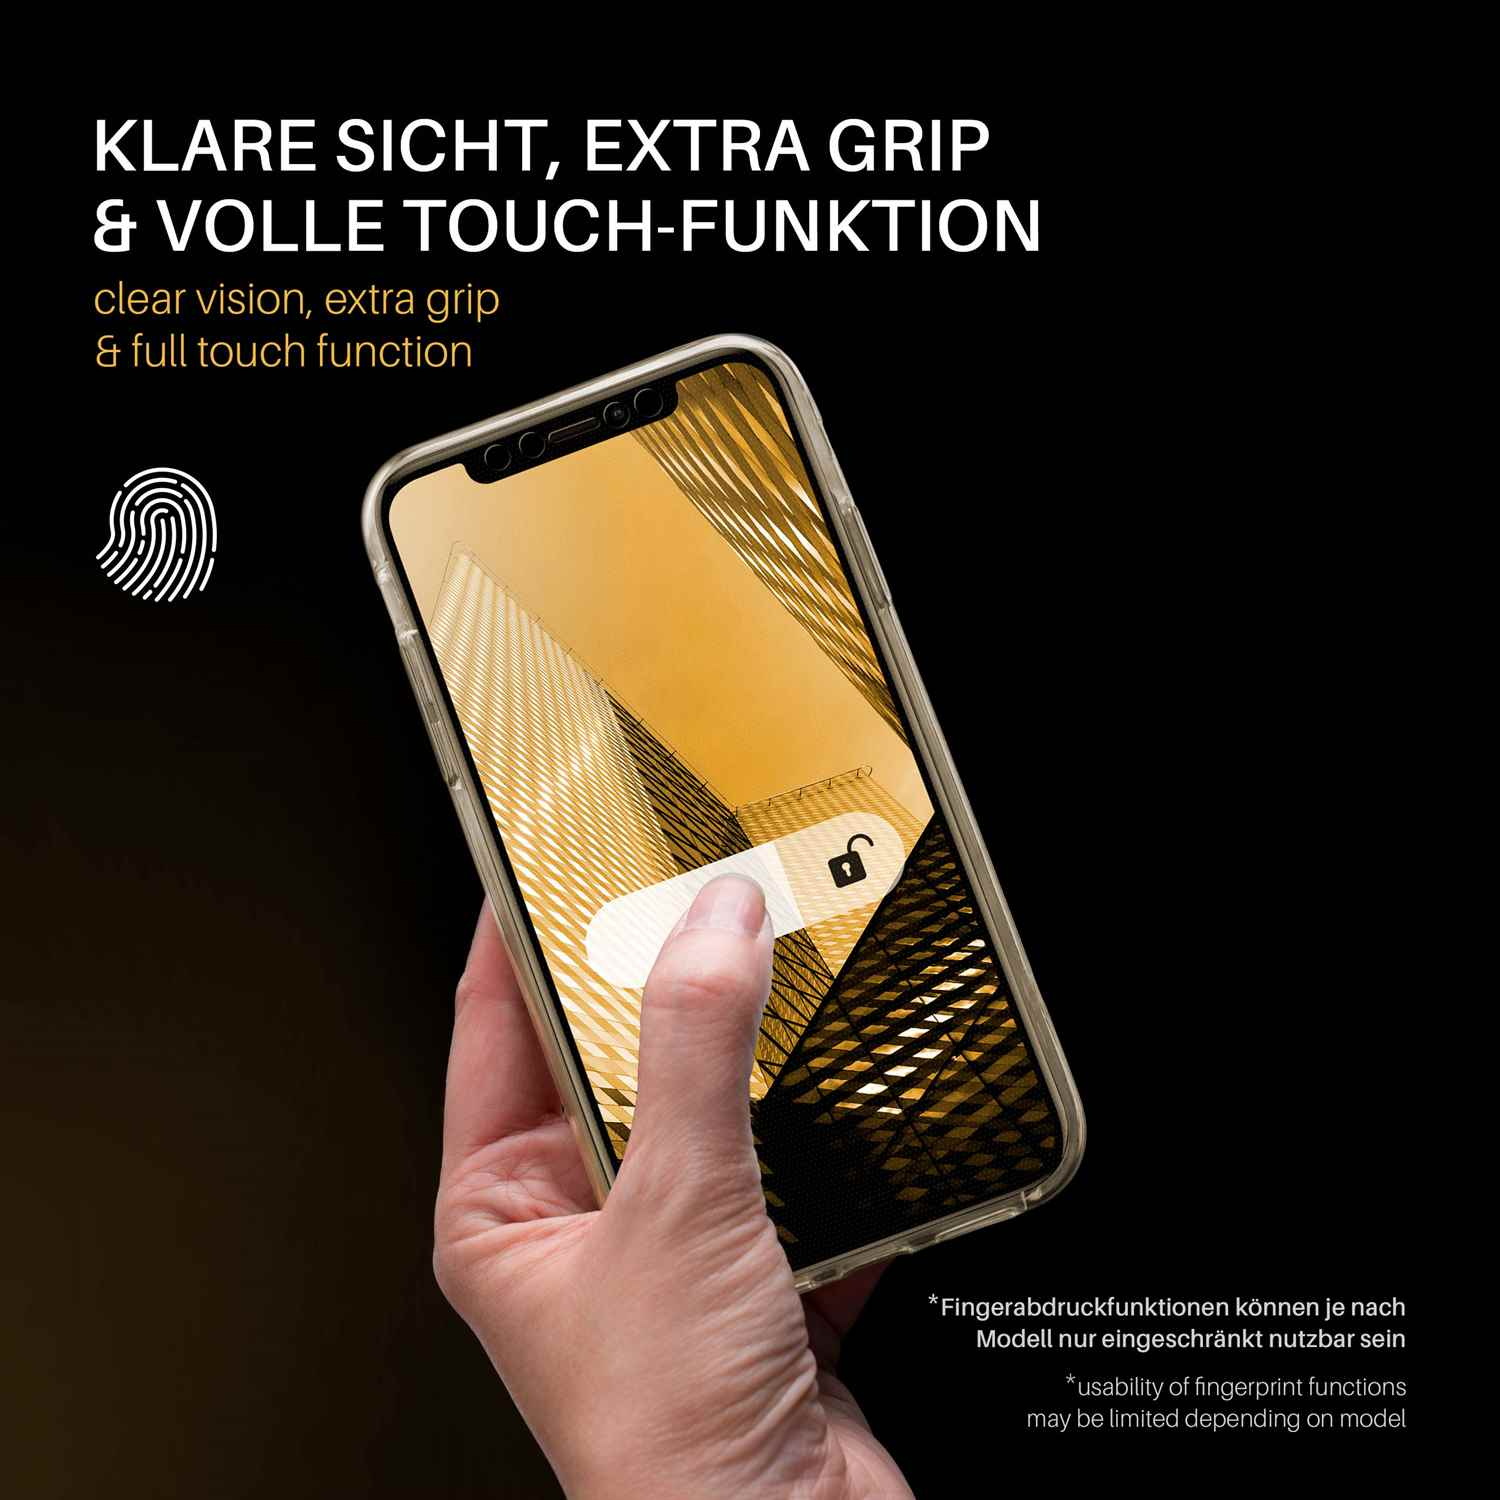 iPhone Full Gold MOEX Cover, Case, Double Apple, 5,